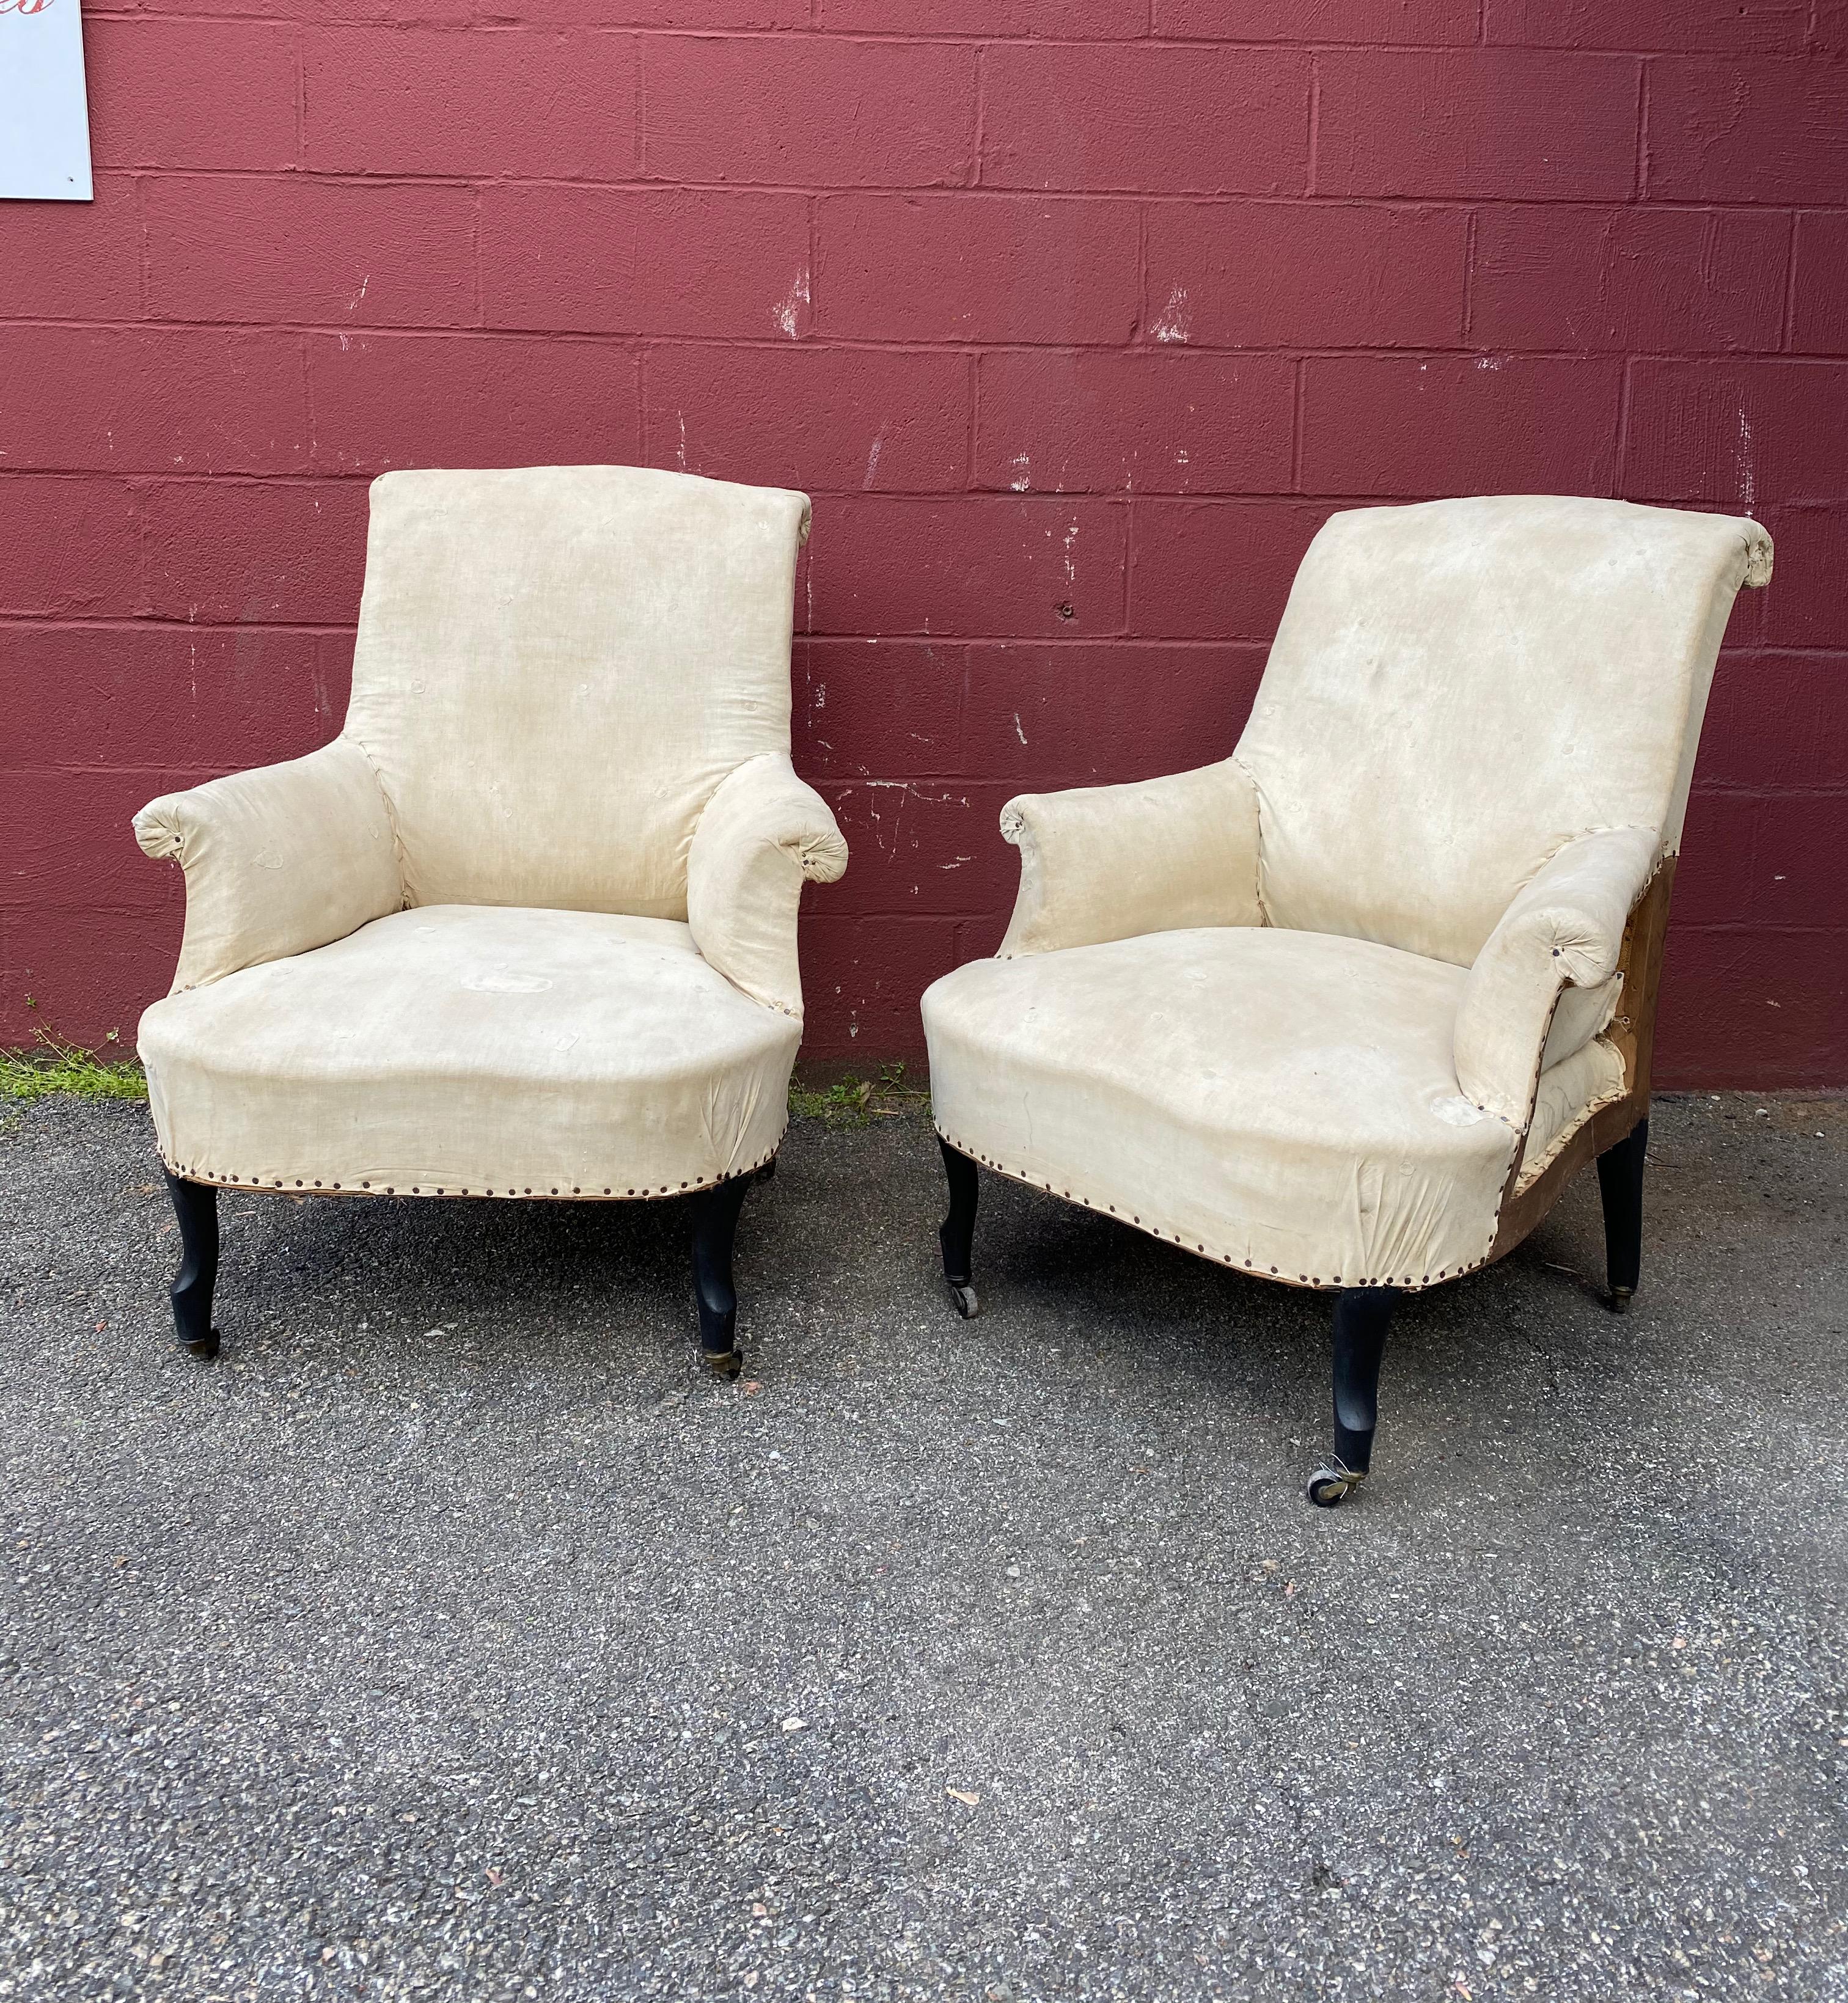 A pair of French 19th century Napoleon III armchairs with very stylish scrolled backs and arms. The chairs have been stripped down to the muslin and are ready to be upholstered. Sold as is 

French, circa 1880.
 